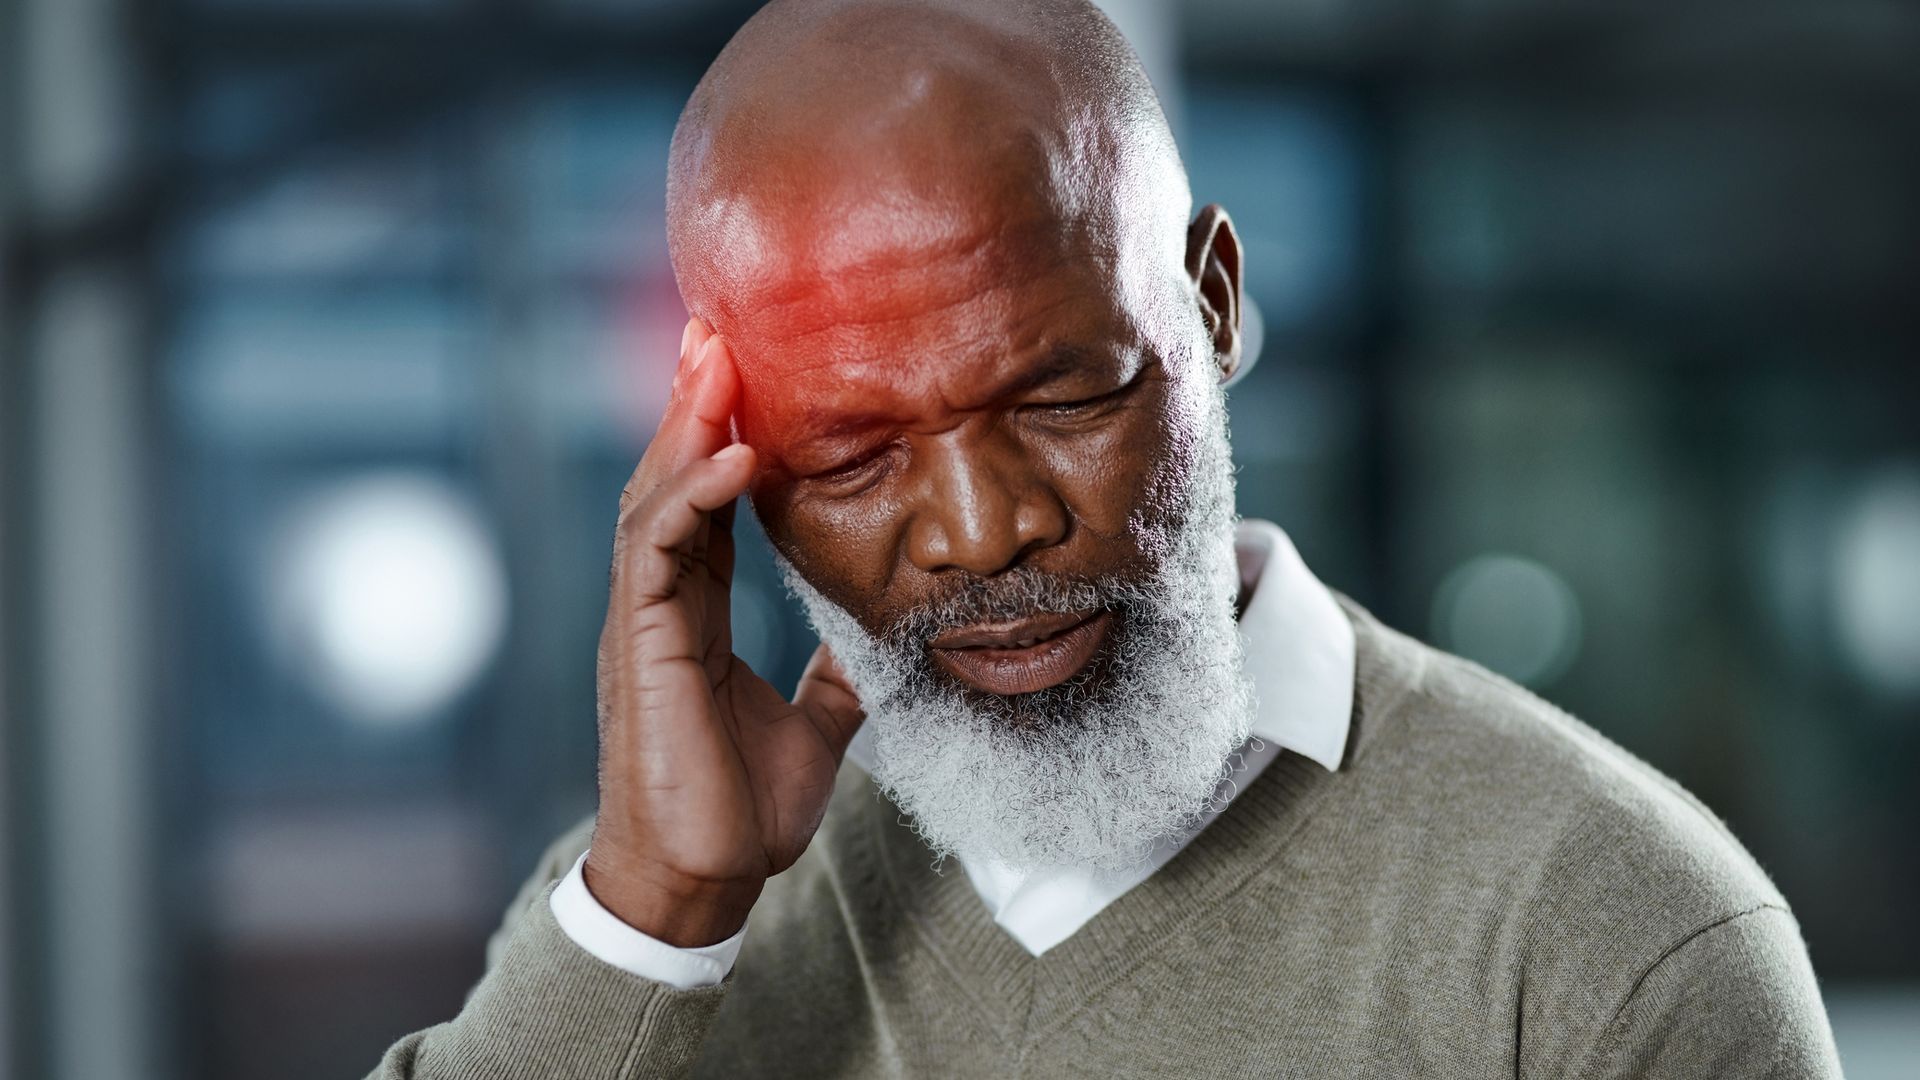 Man with Terrible Headache - New Bloomfield, PA - Mulhollem Chiropractic Clinic